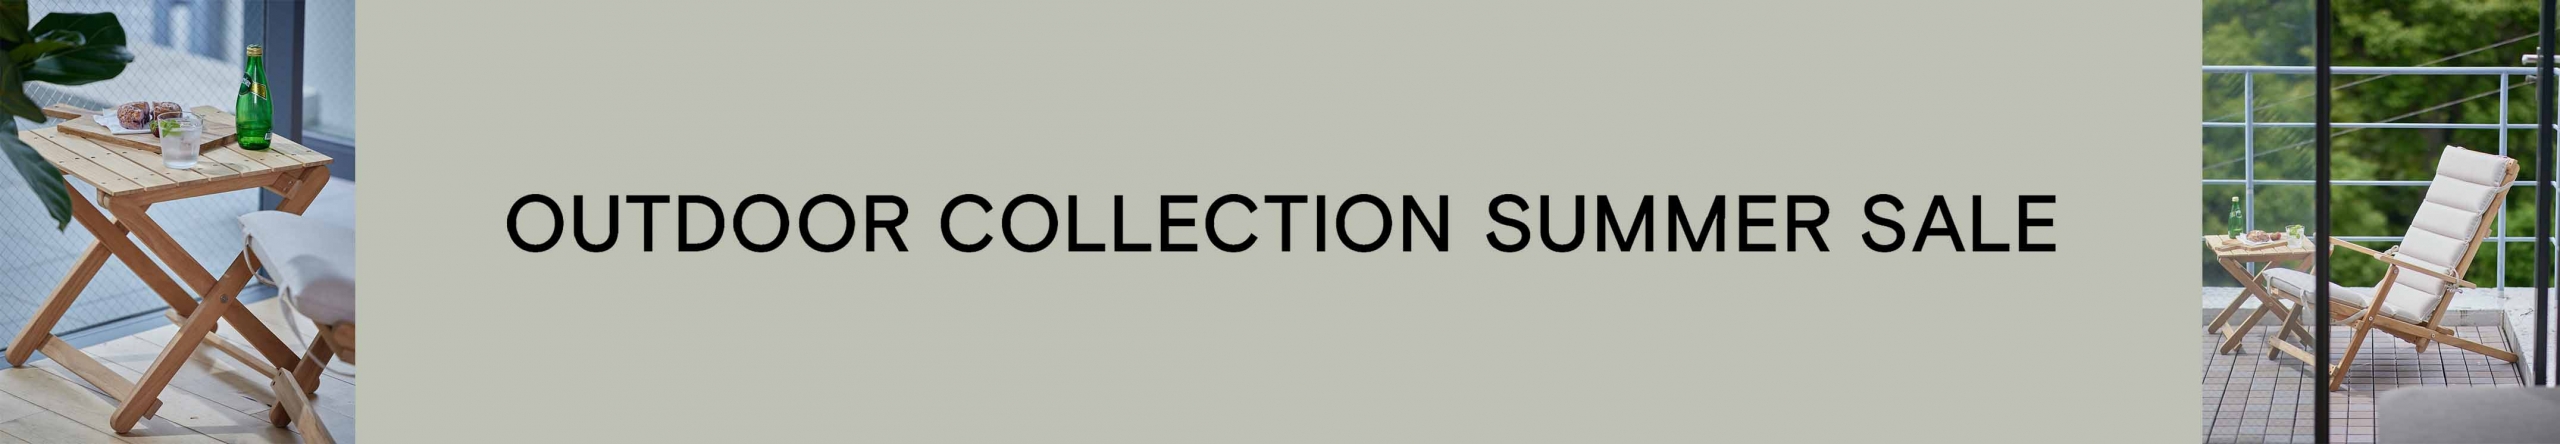 OUTDOOR COLLECTION SUMMER SALE